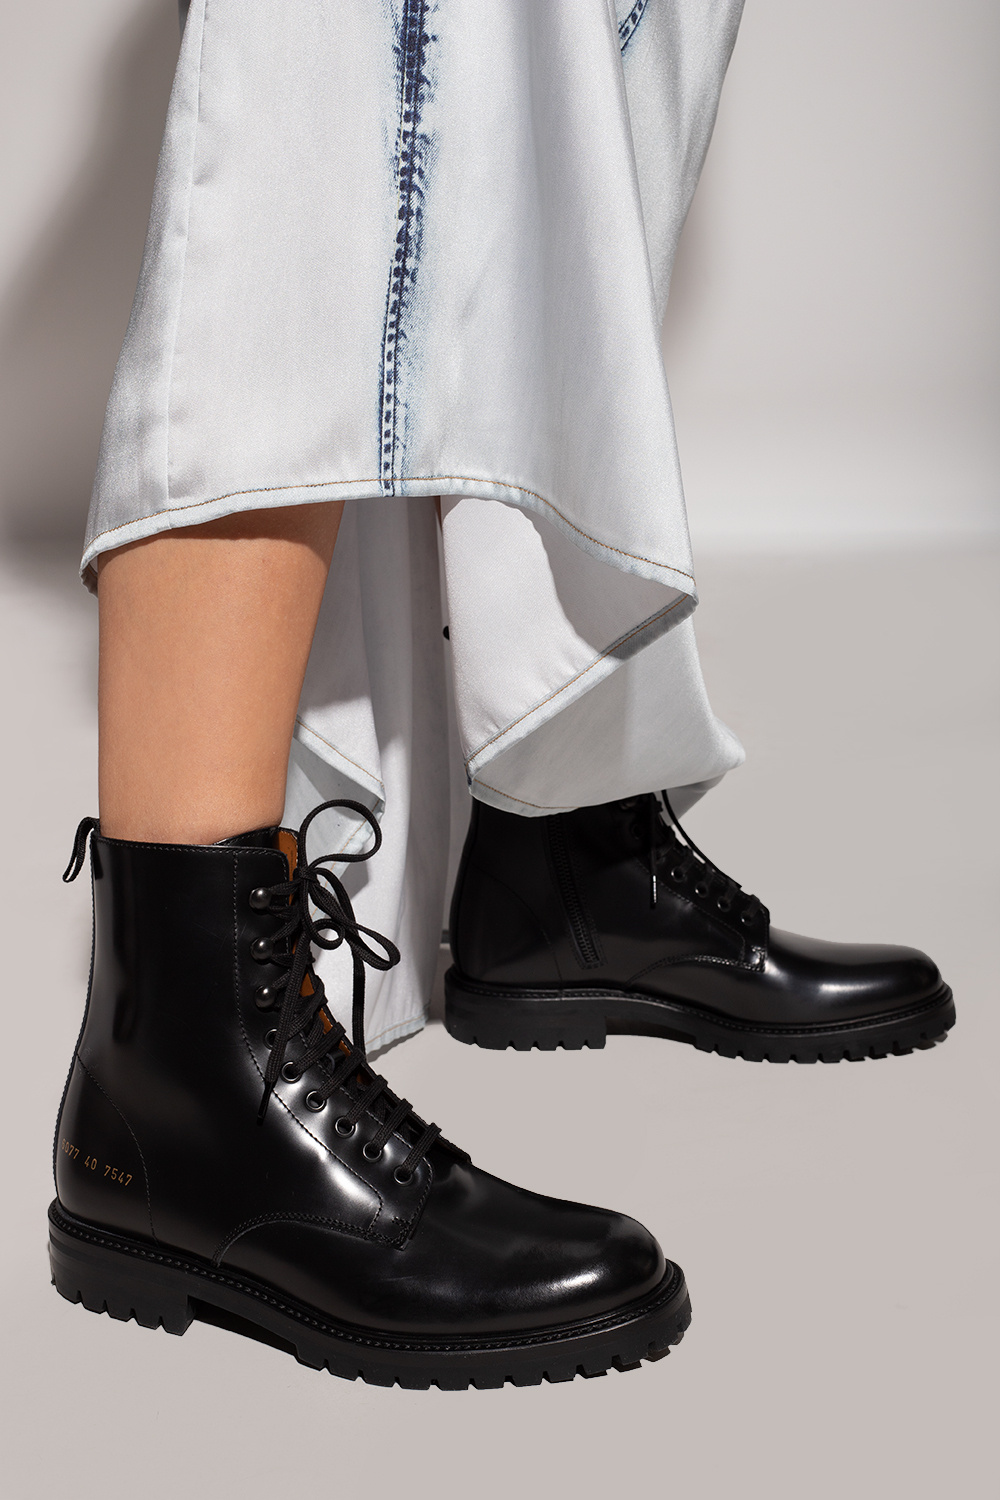 Common Projects ‘Combat’ leather ankle boots